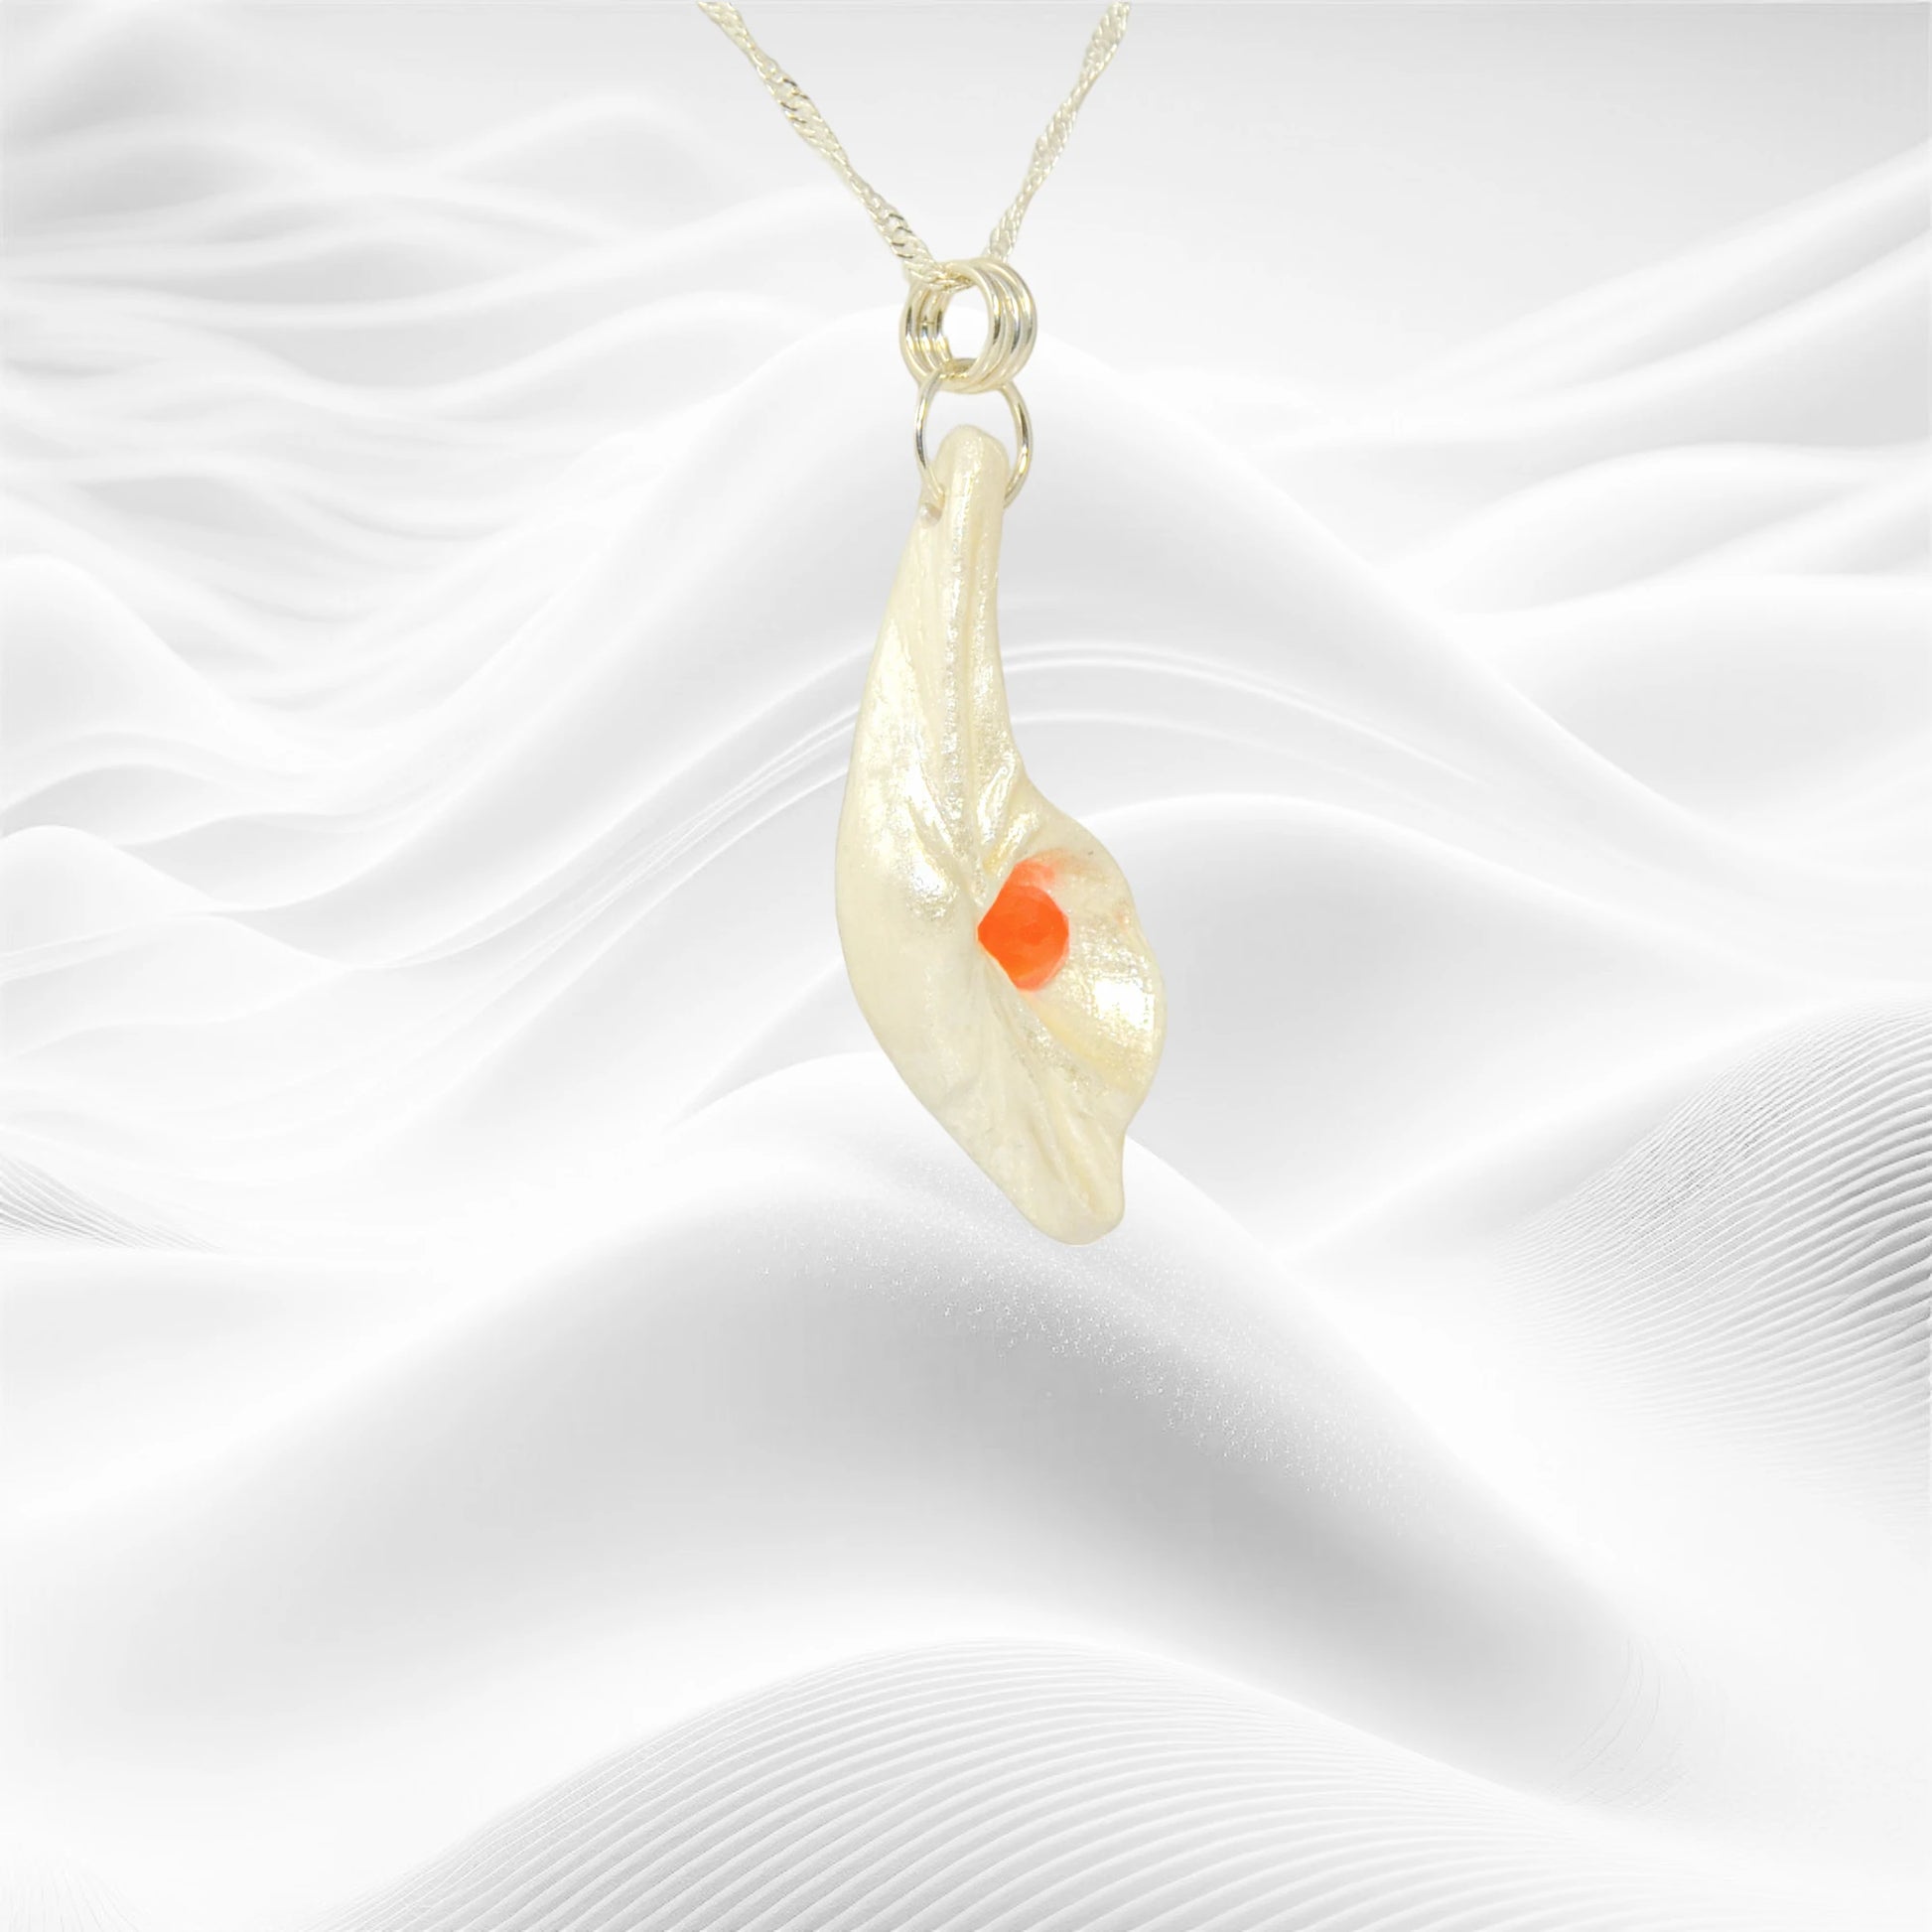 Natural Seashell pendant, elevating the beautiful natural nuances to new heights. The pendant is perfectly adorned with a mesmerizing rose cut Carnelian gemstone.